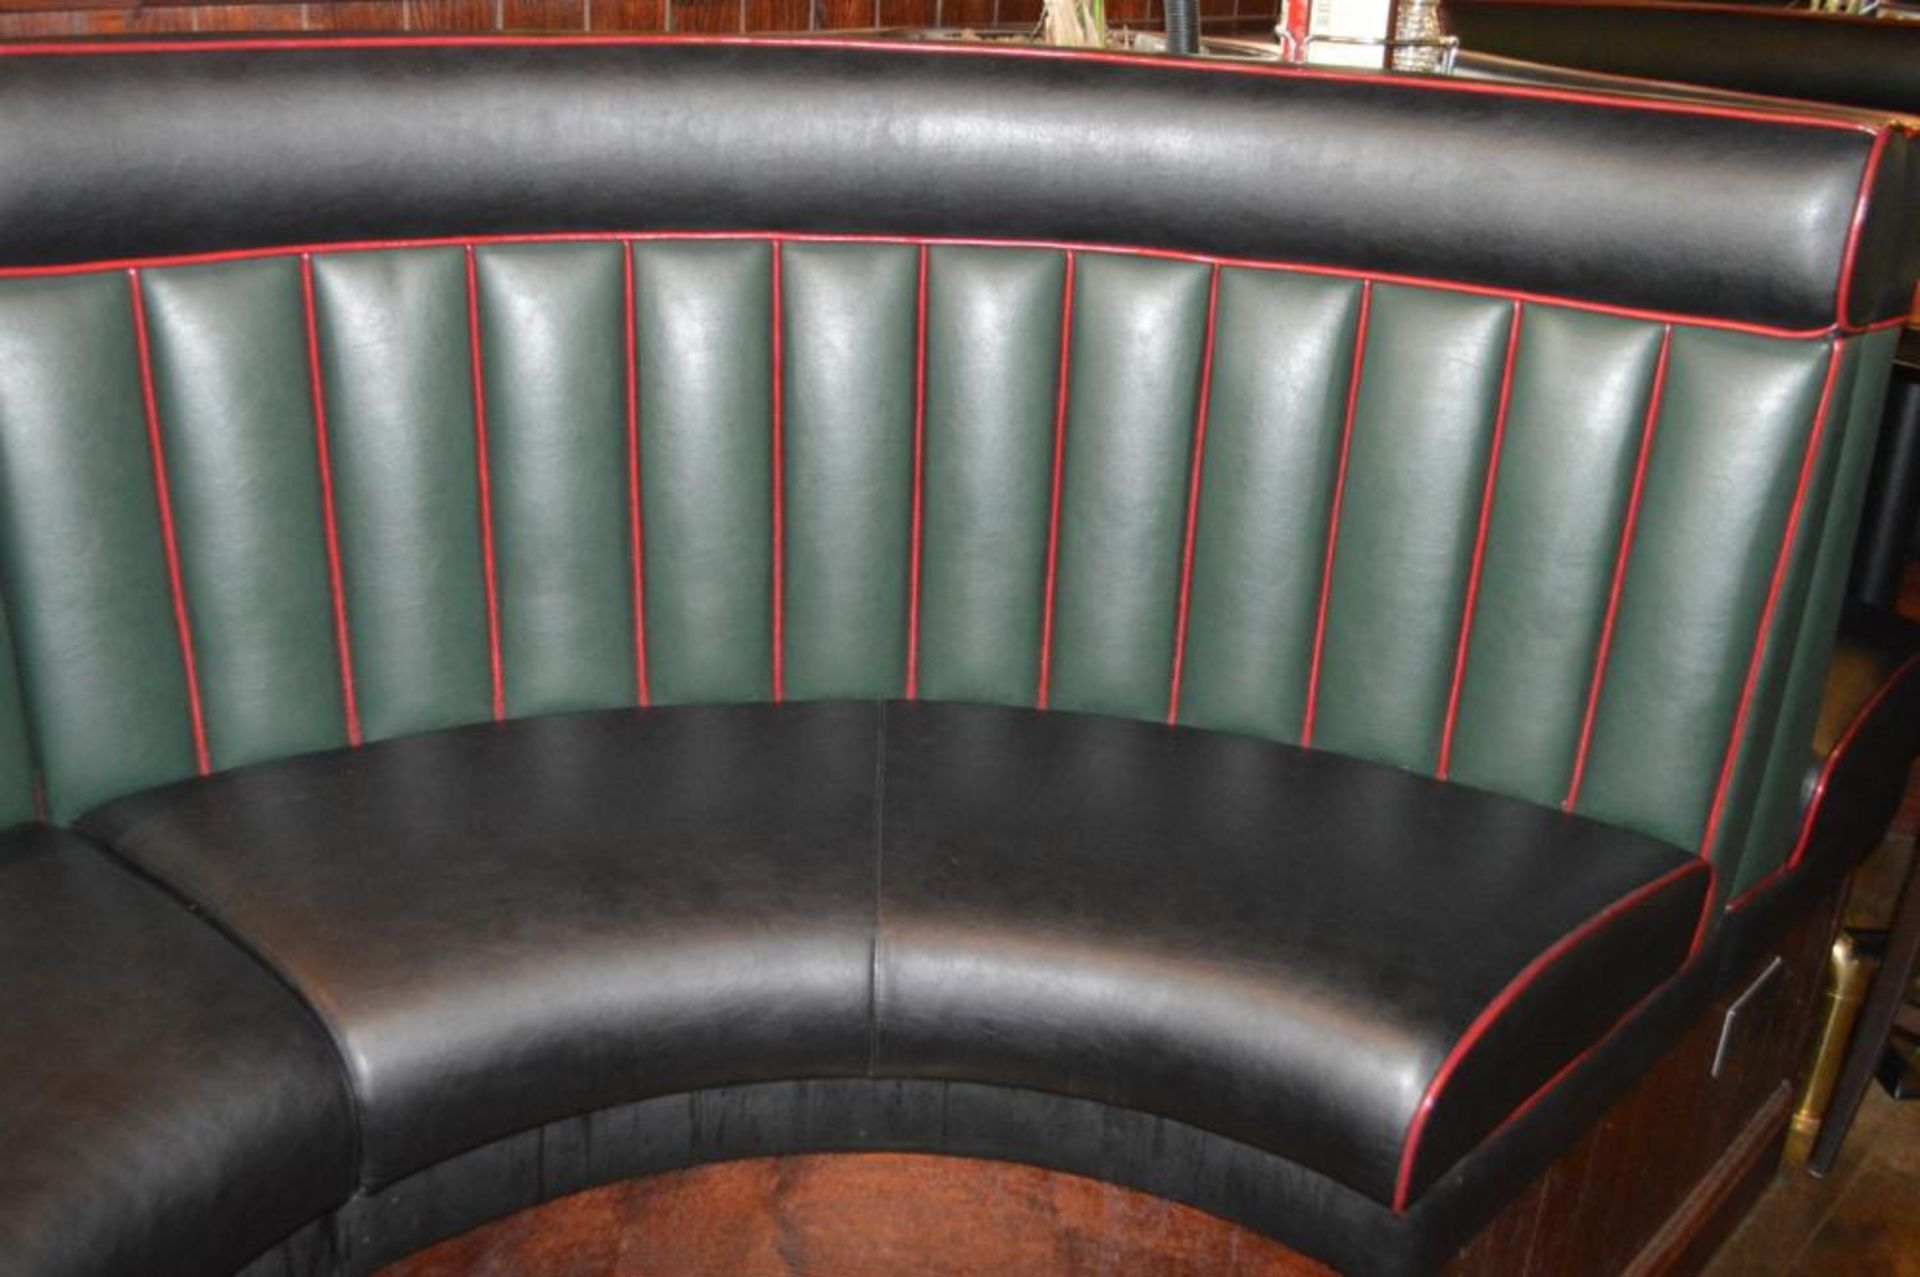 5 x Contemporary Half Circle High Seat Booths - Features a Leather Upholstery in Green and Black, - Image 6 of 11